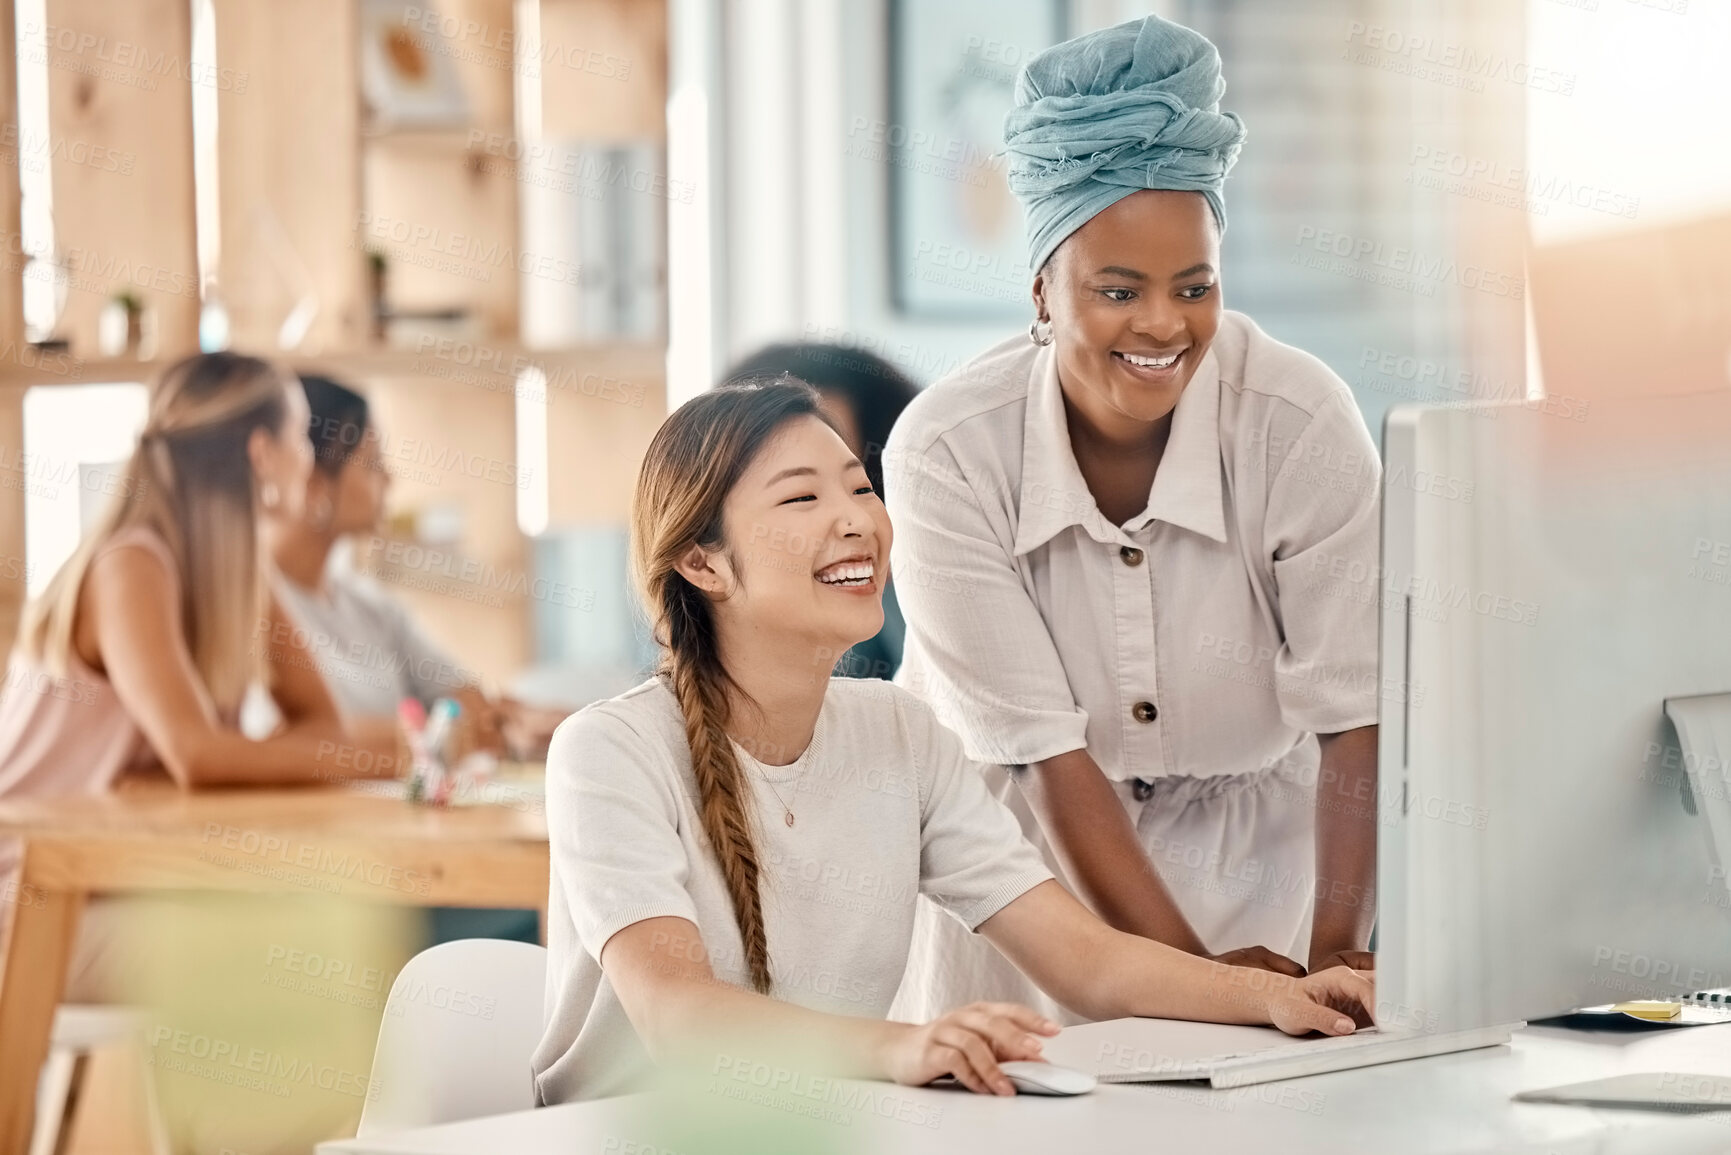 Buy stock photo Diversity, help or training at computer in web design company office brainstorming idea with smile. Asian, black woman and interracial webdesign employees working on ux project in workplace.